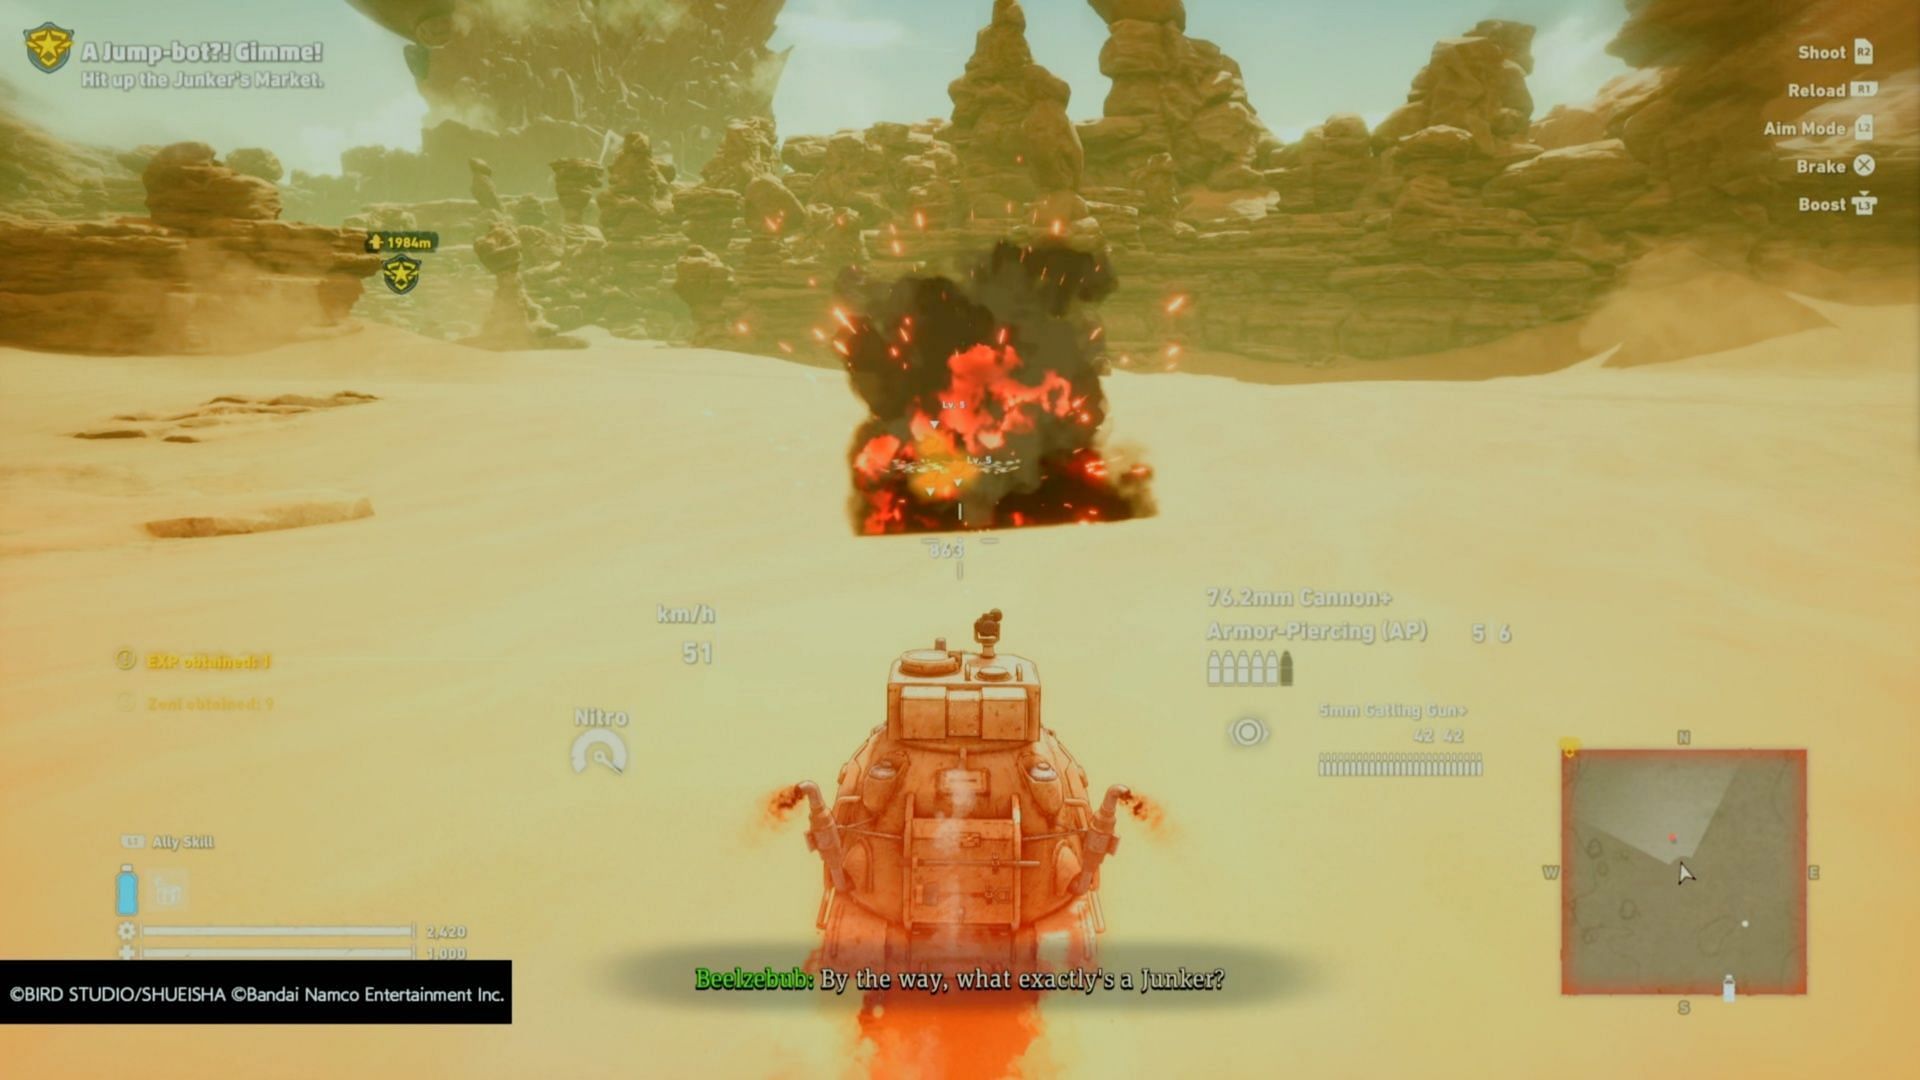 Blowing stuff up with a tank is so satisfying (Image via Bandai Namco)